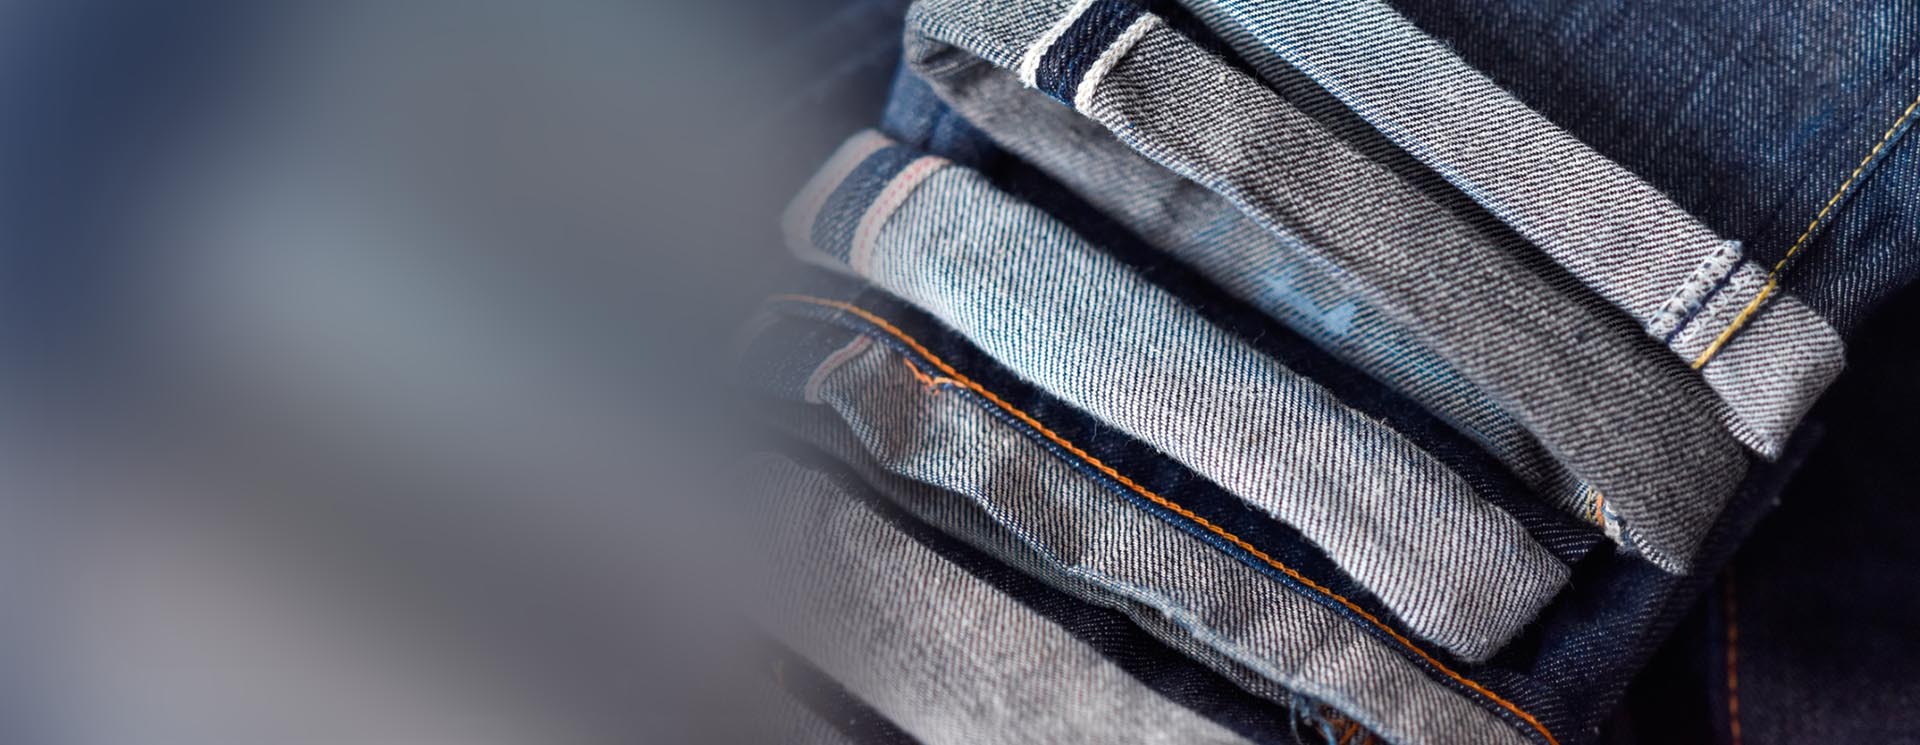 Denim should be a dynamic piece & something that develops character with every wear - wear Denim, wear Selvedge